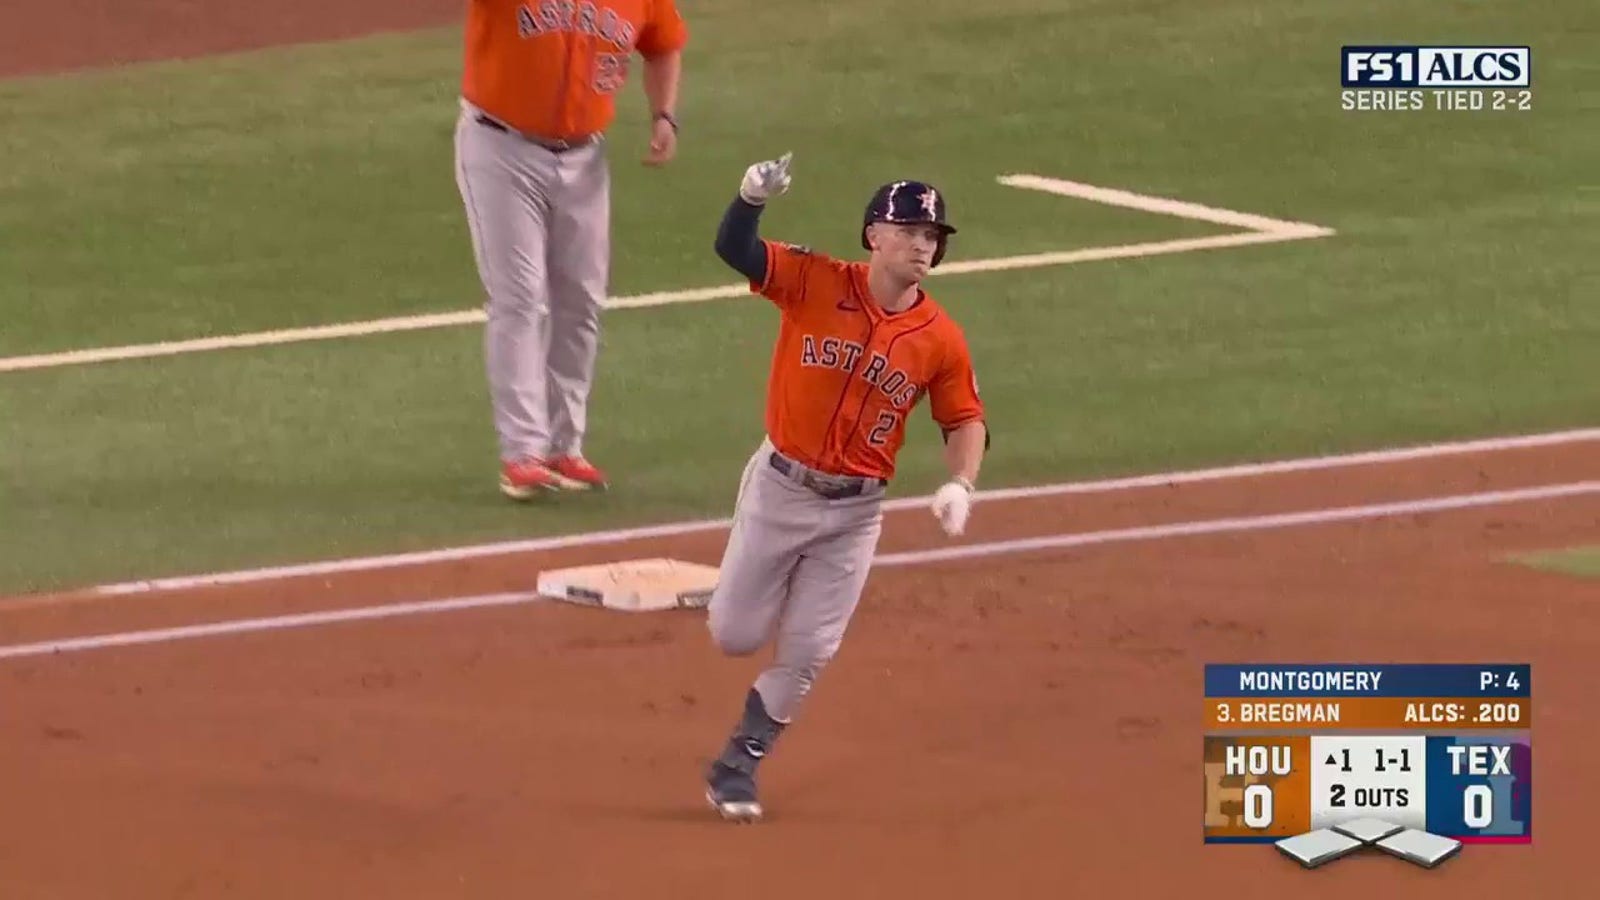 Alex Bregman launches a solo home run to give Astros an early lead against Rangers